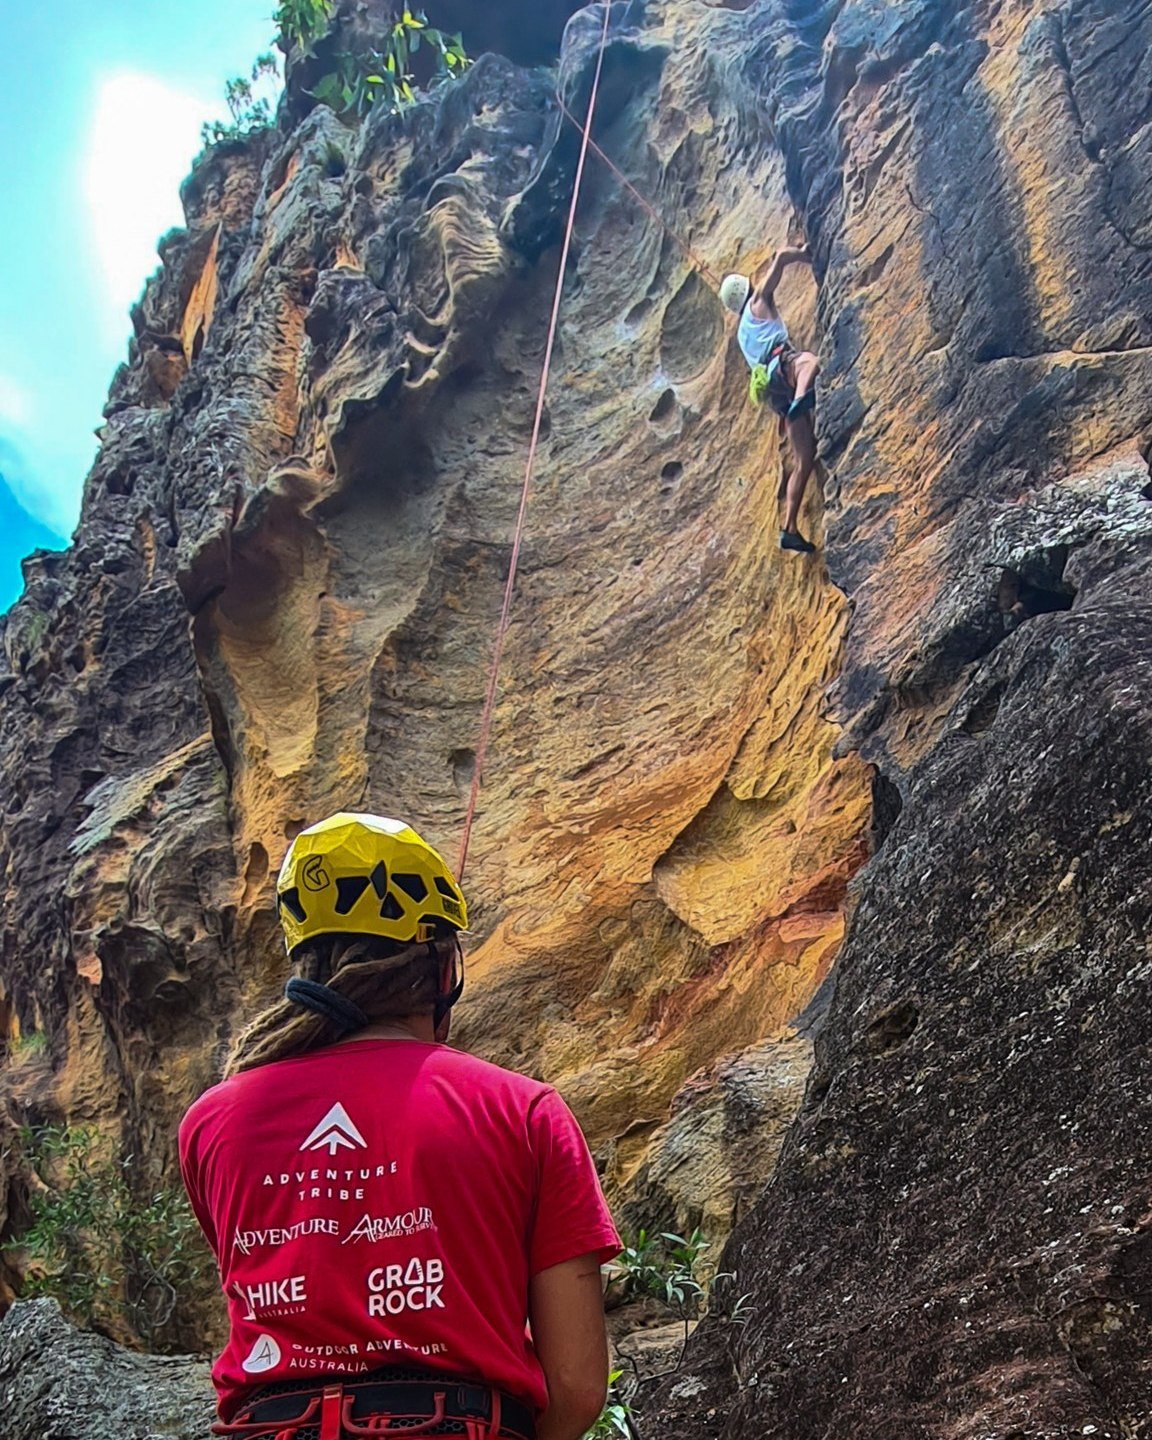 Ready to push your limits and get outside your comfort zone? 🌟Our rock climbing tour offers the perfect opportunity to challenge yourself amidst the beauty of nature. ⛰ Feel the thrill of scaling cliffs, conquering fears and reaching new heights bot